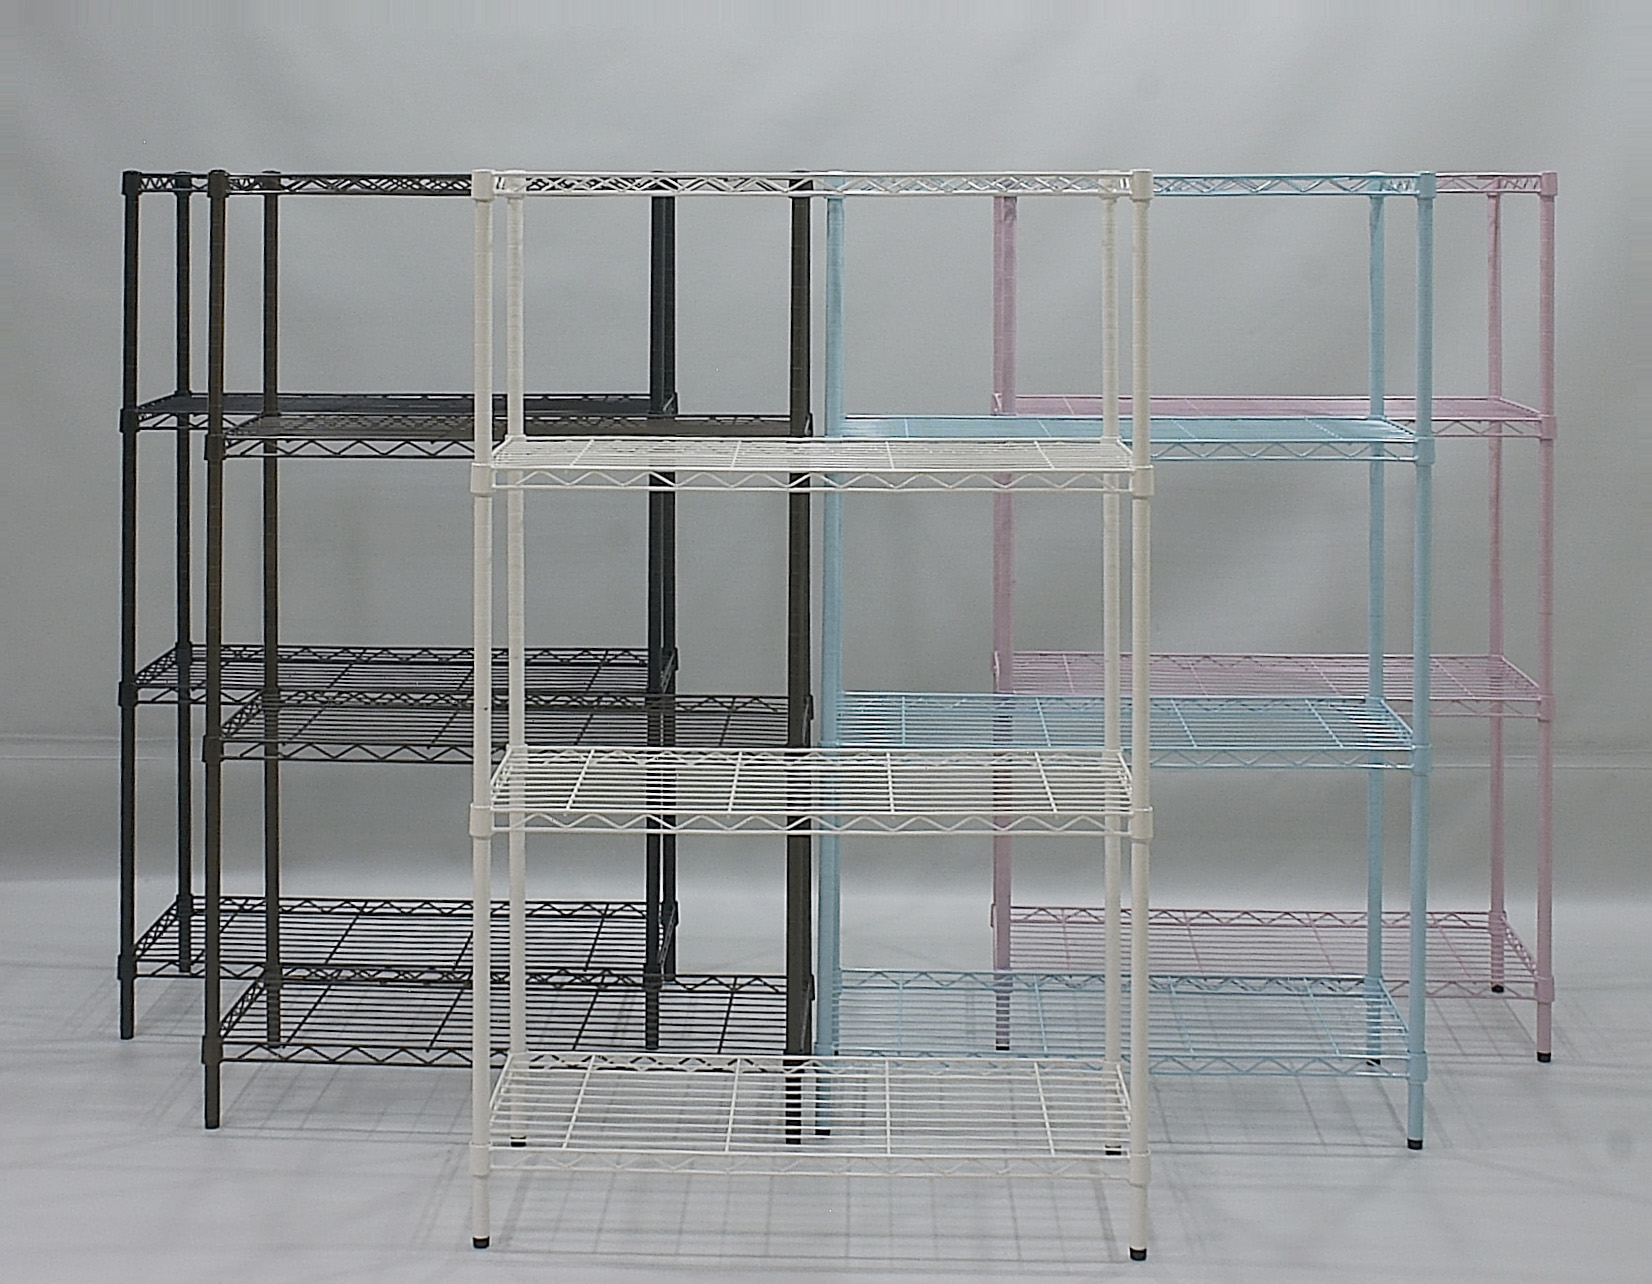 The heavy-duty display racks, newly developed by Chao Yuon, are available in different colors.